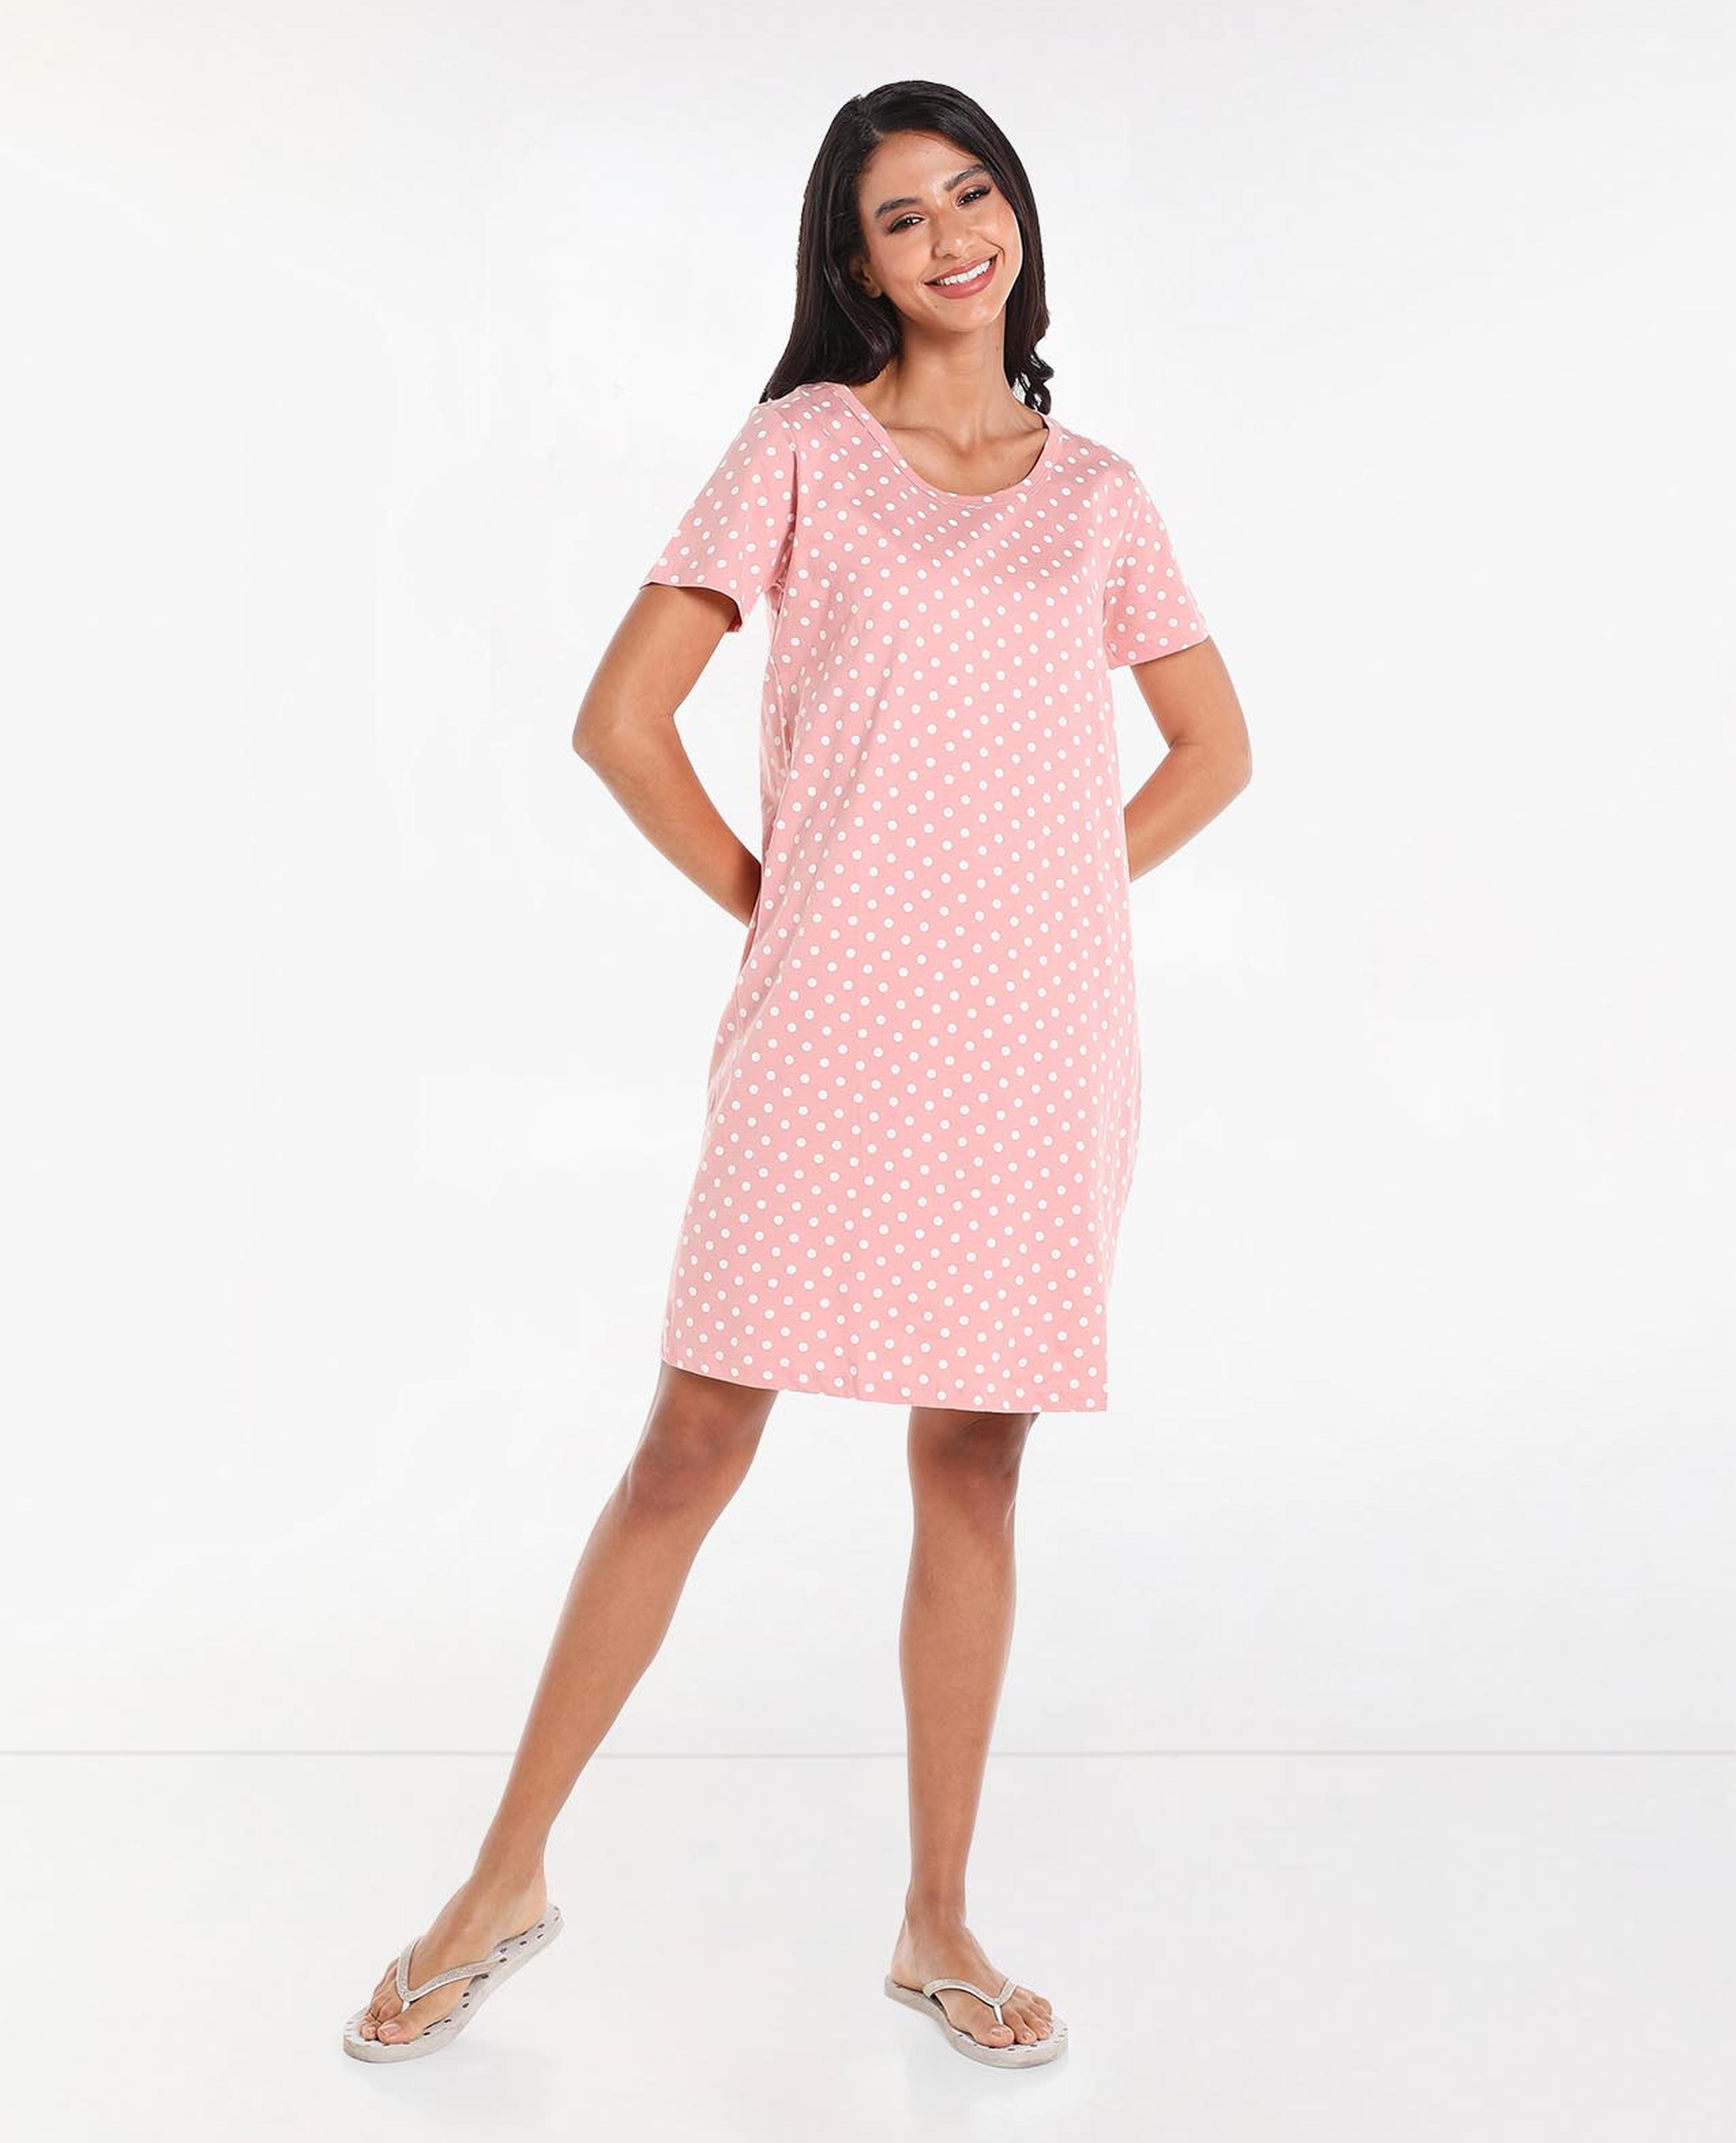 Polka Dots Printed Sleep T-Shirt with Round Neck and Short Sleeves